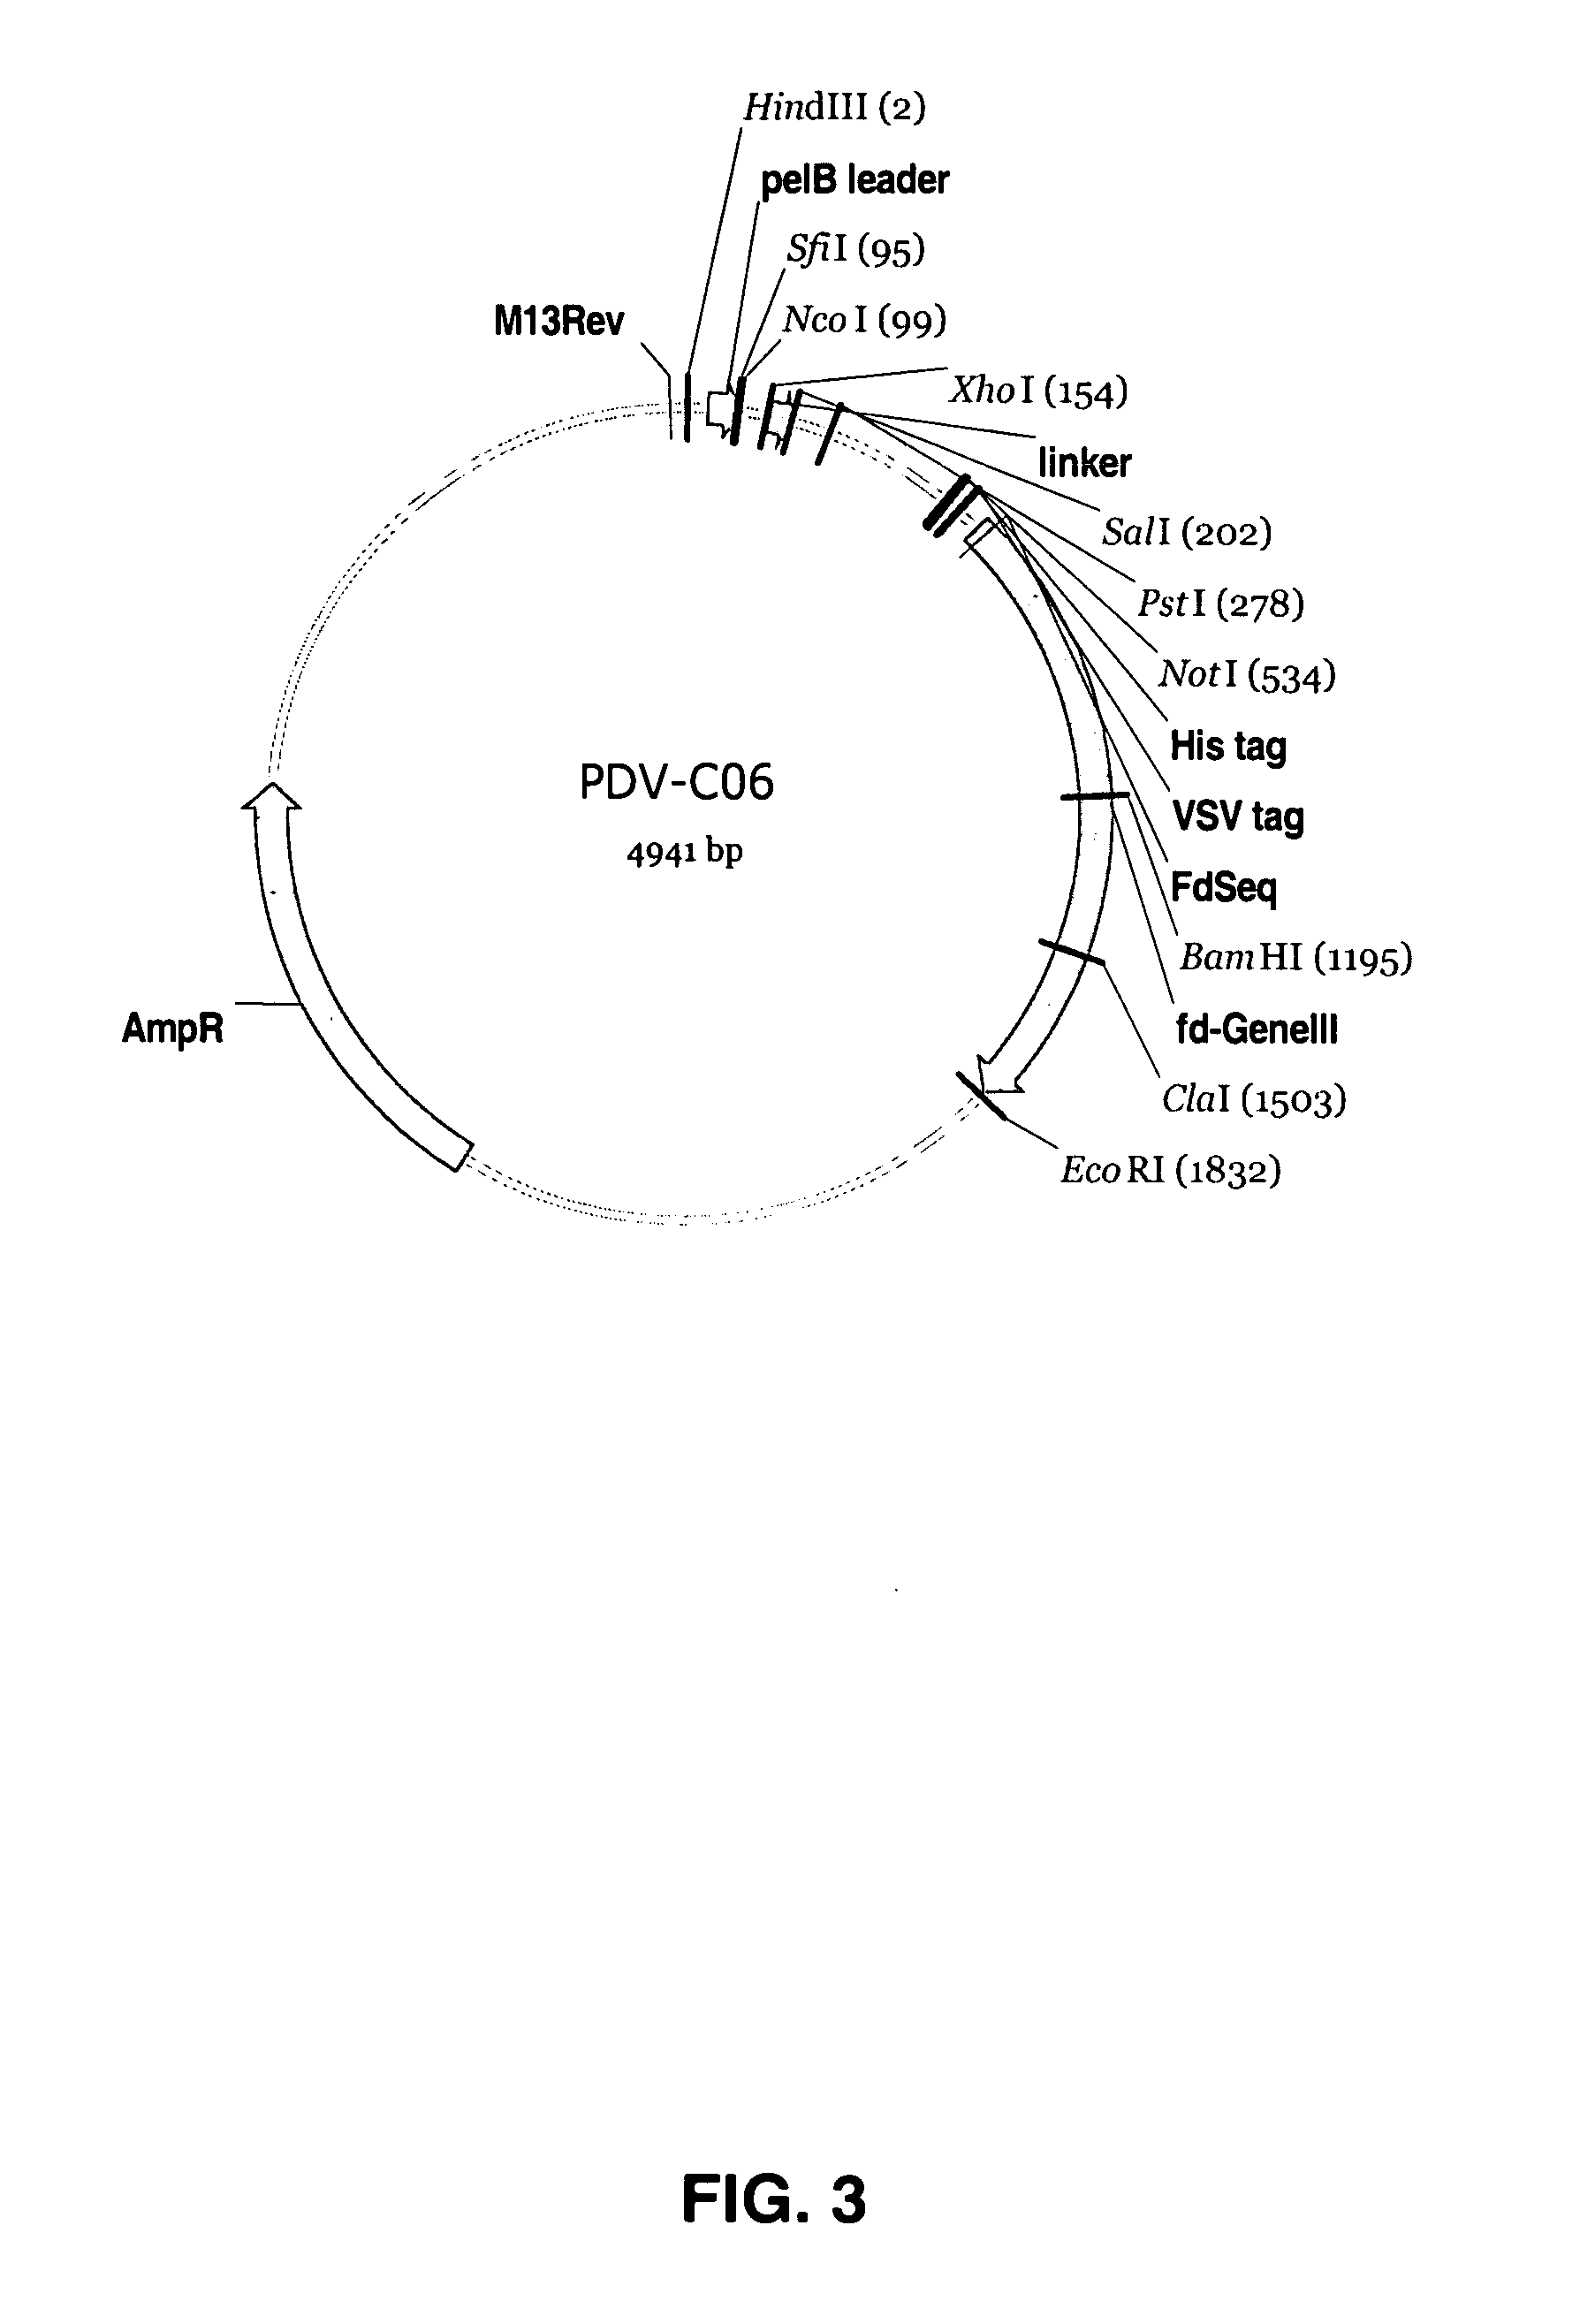 Binding molecules capable of neutralizing rabies virus and uses thereof